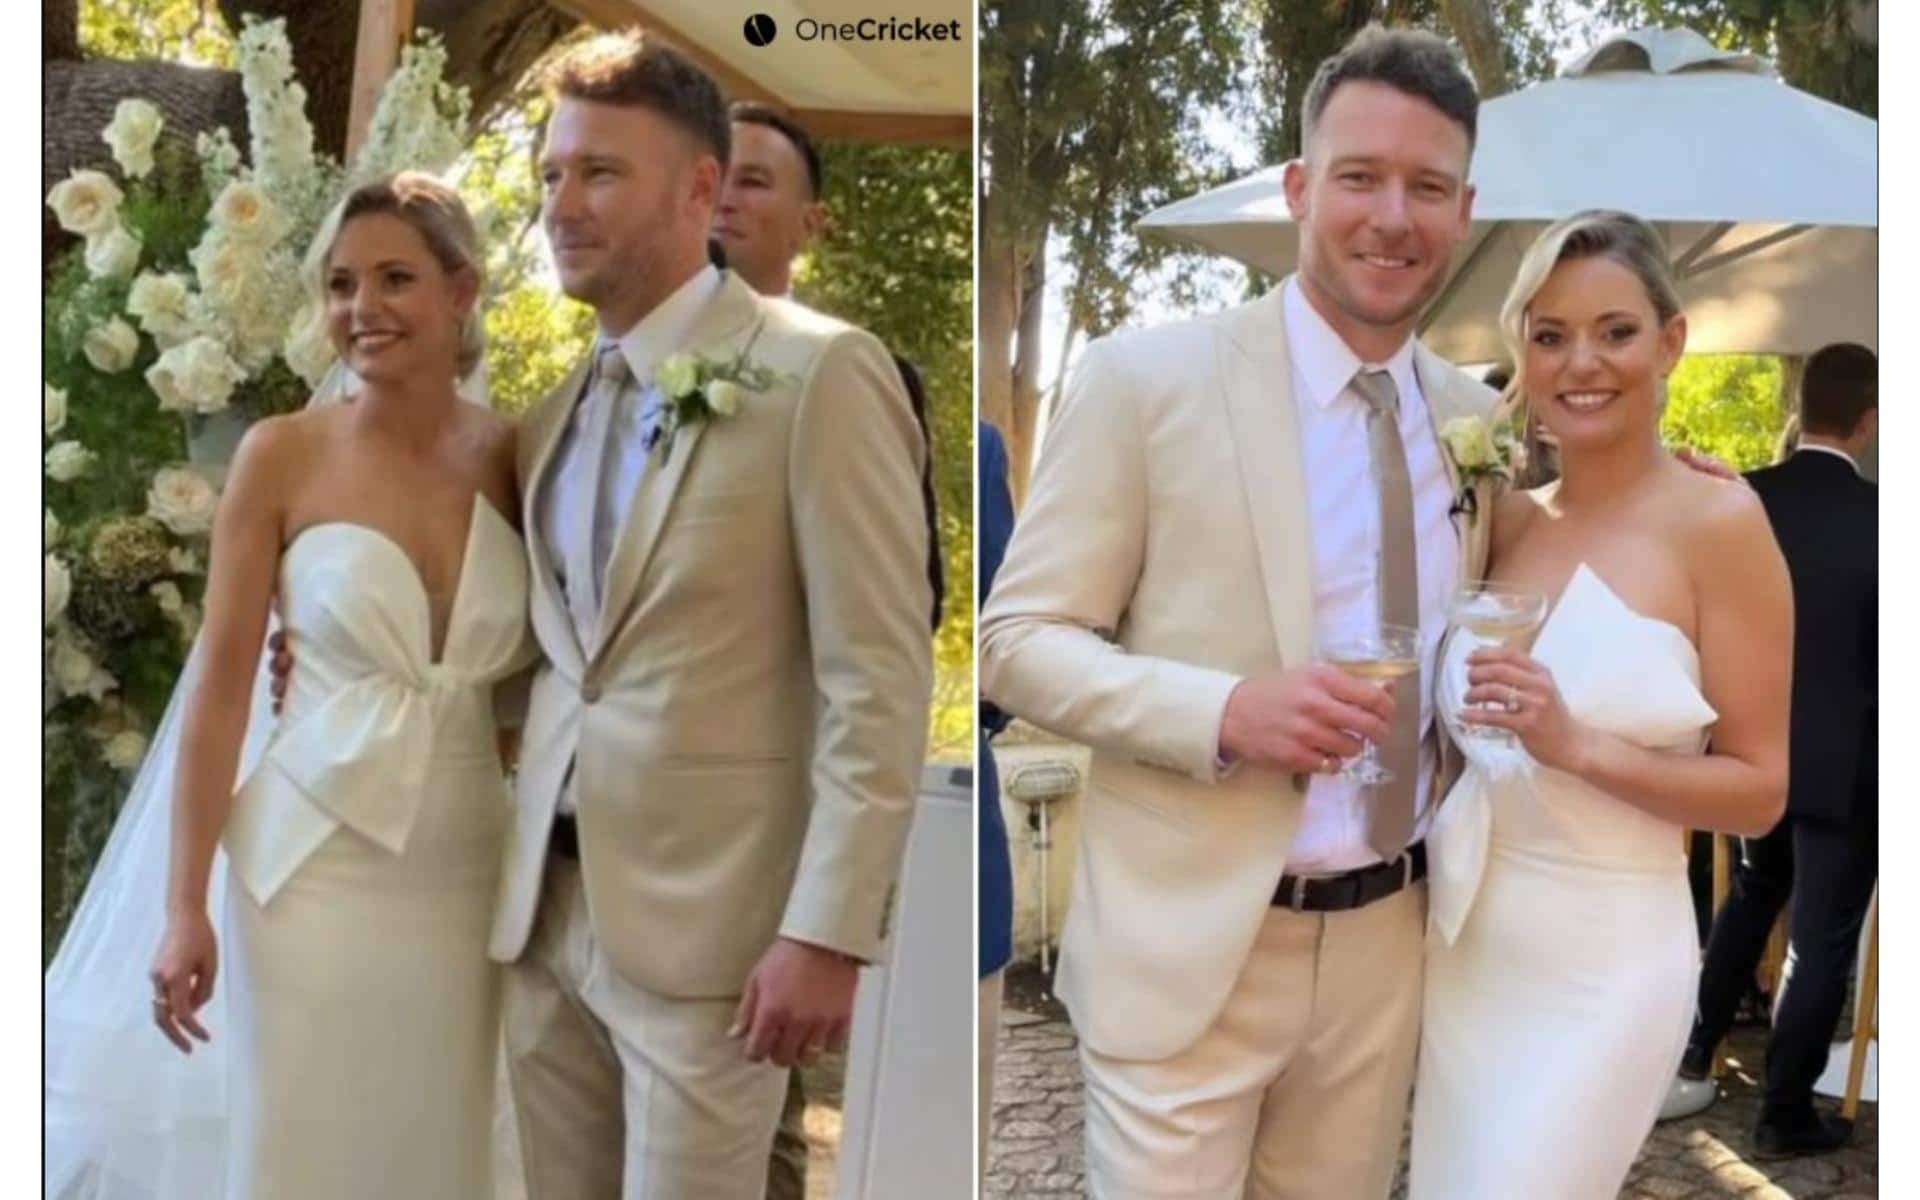 Miller recently got married to his girlfriend Camilla [X